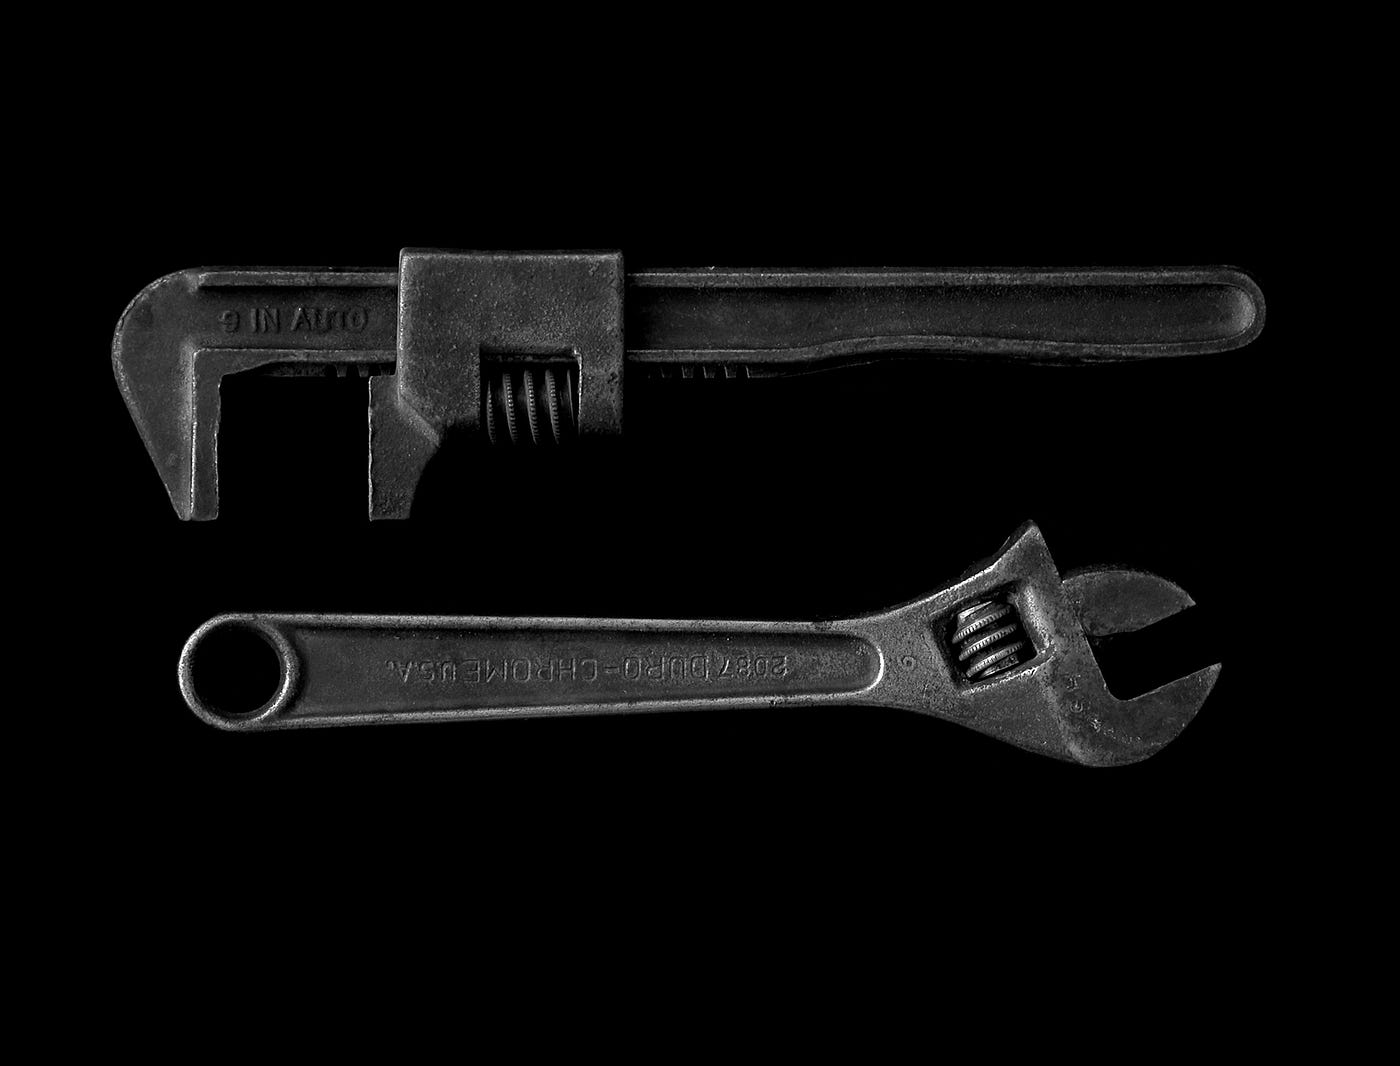 Why is a pipe wrench called a monkey wrench? - Quora